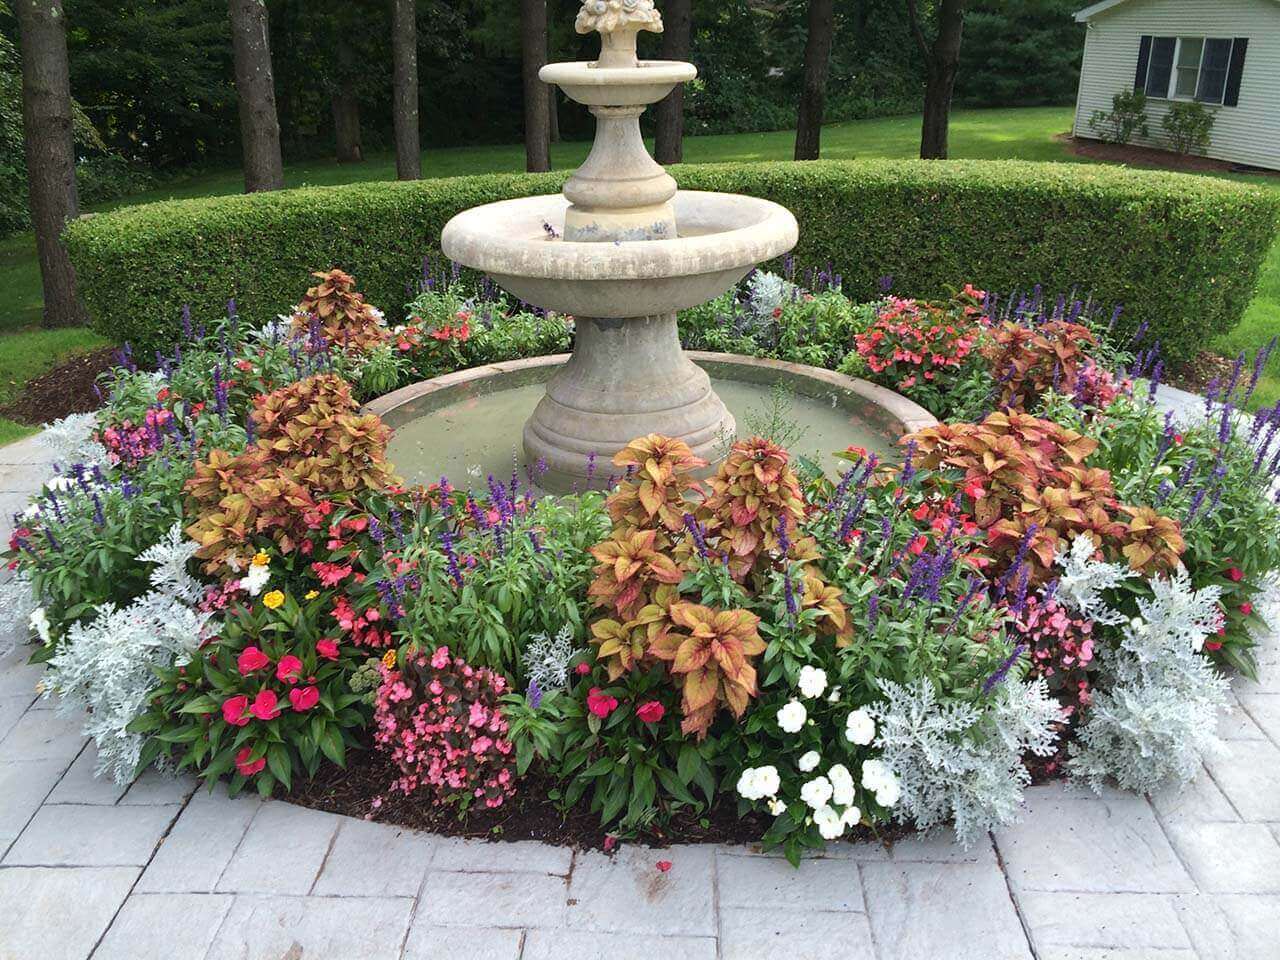 A water fountain surrounded by flowers | A-Z Landscaping